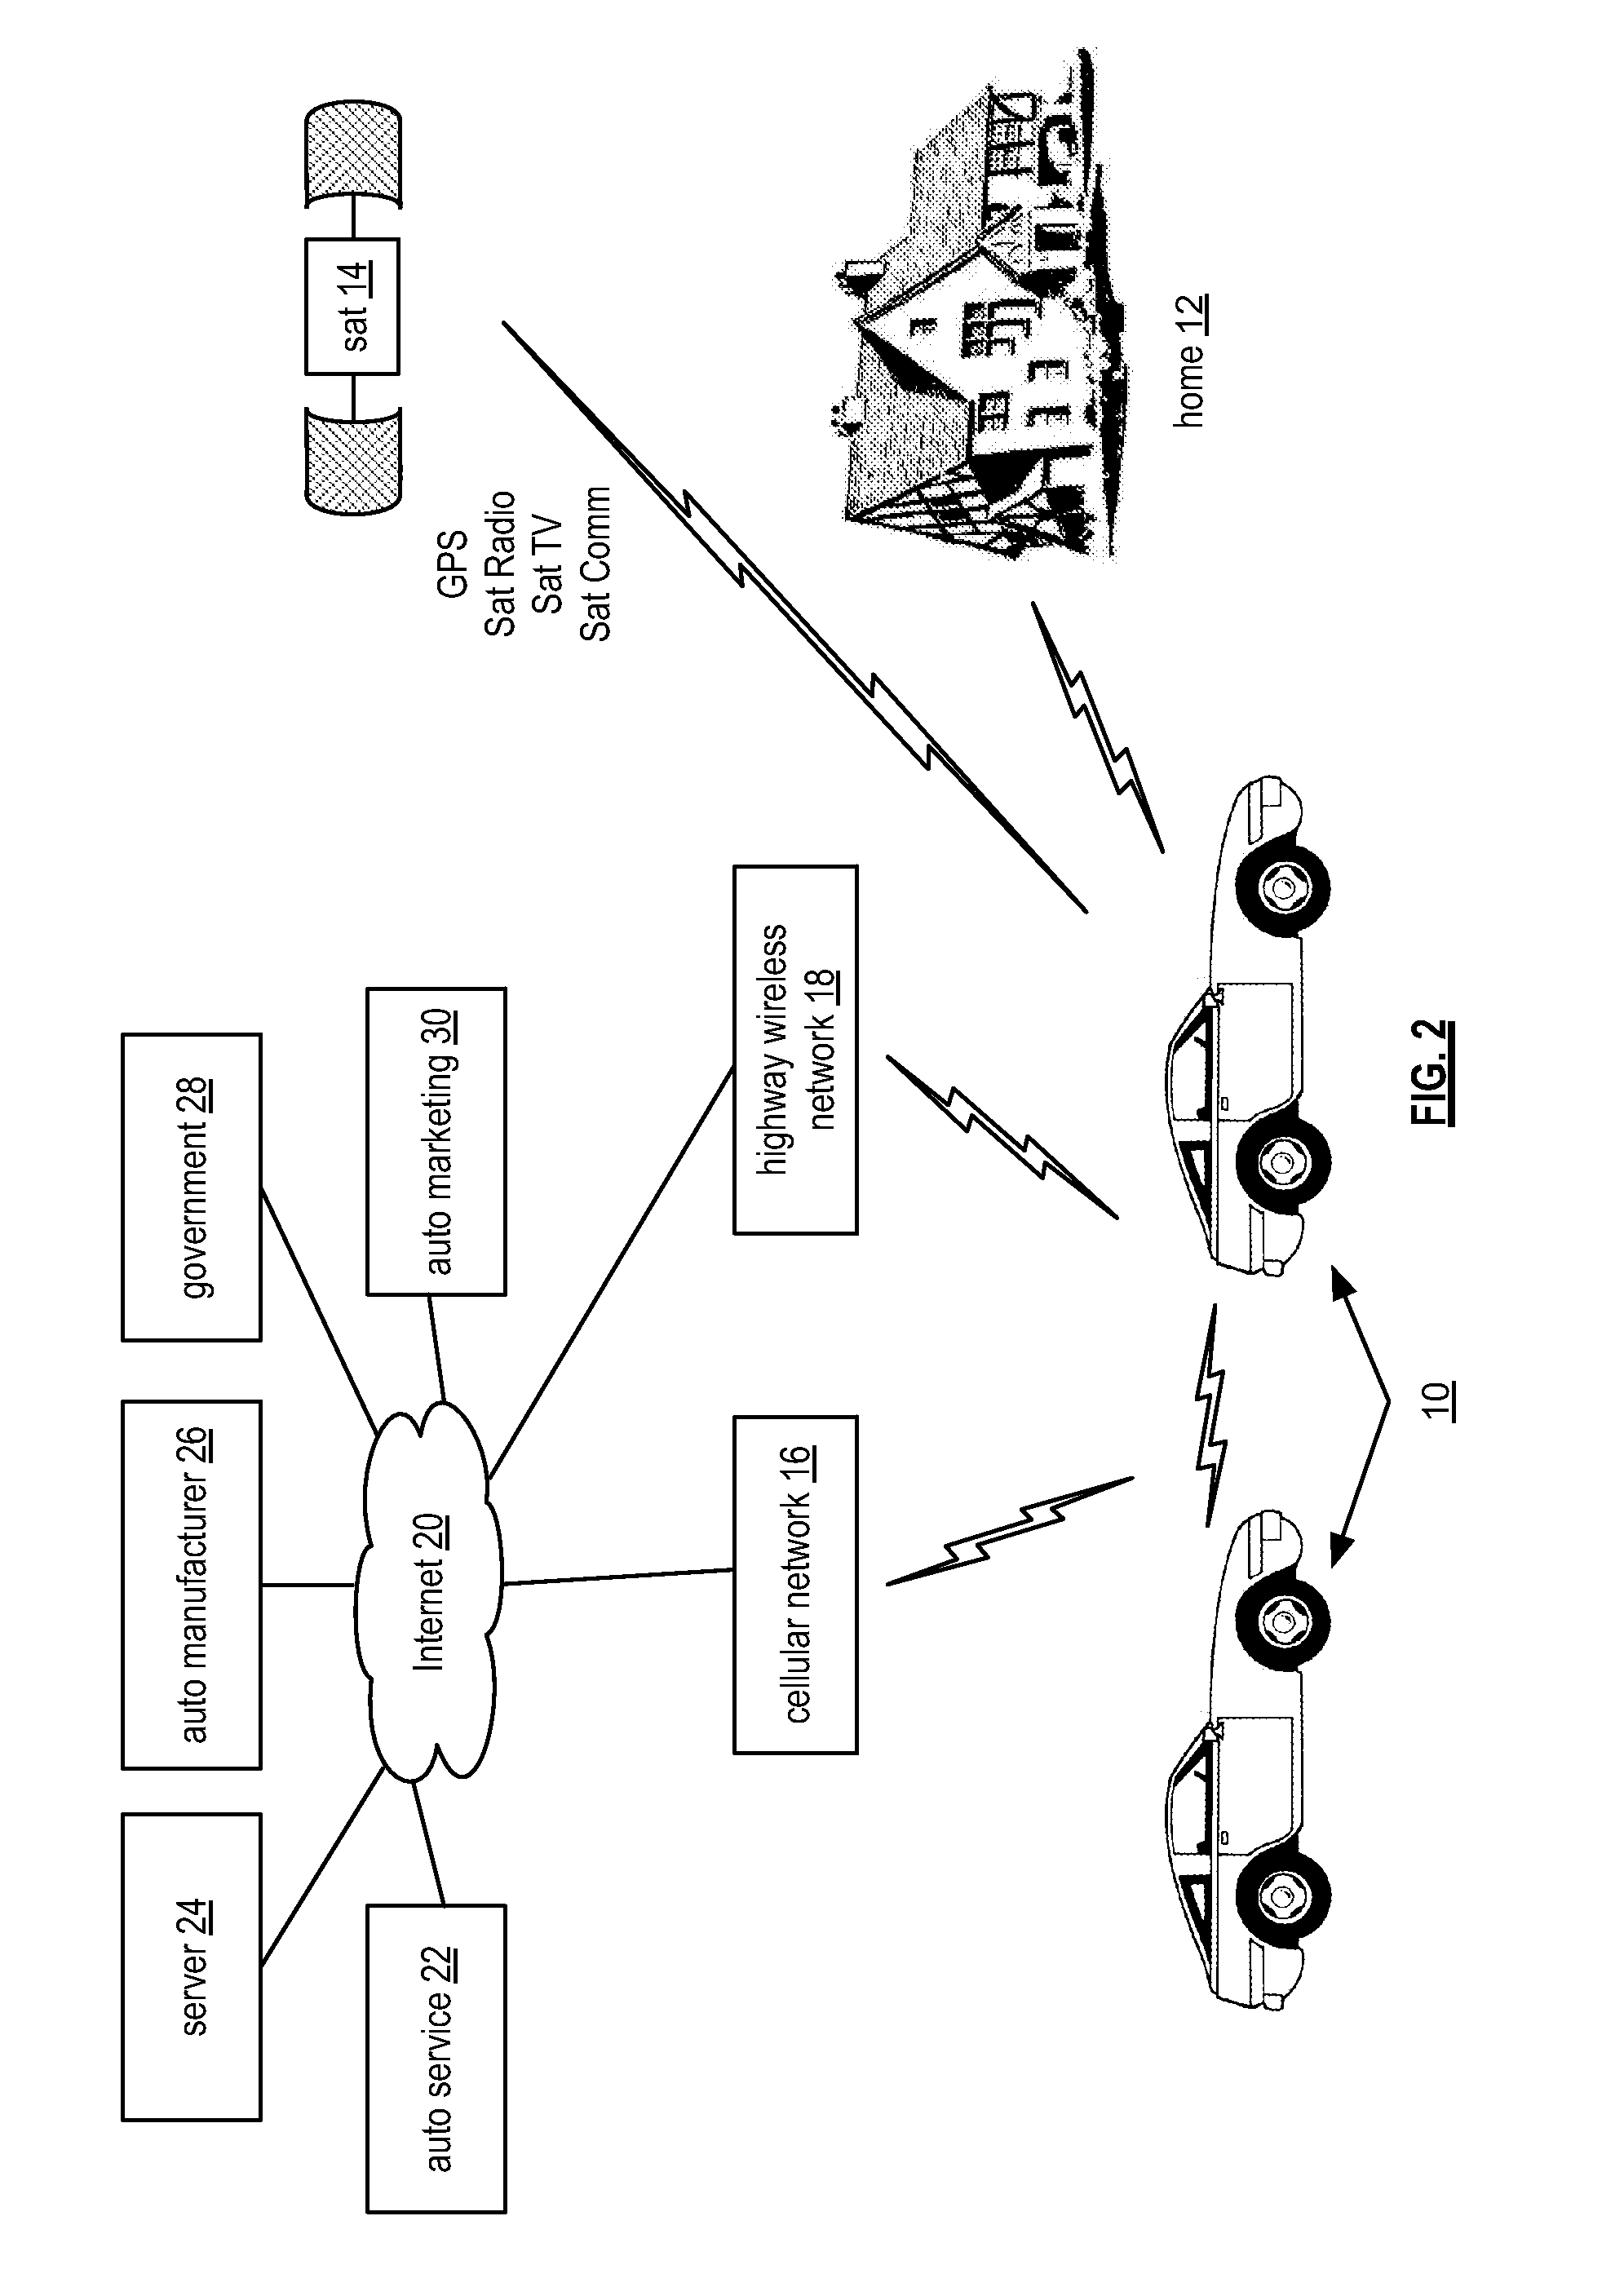 Network management module for a vehicle communication network